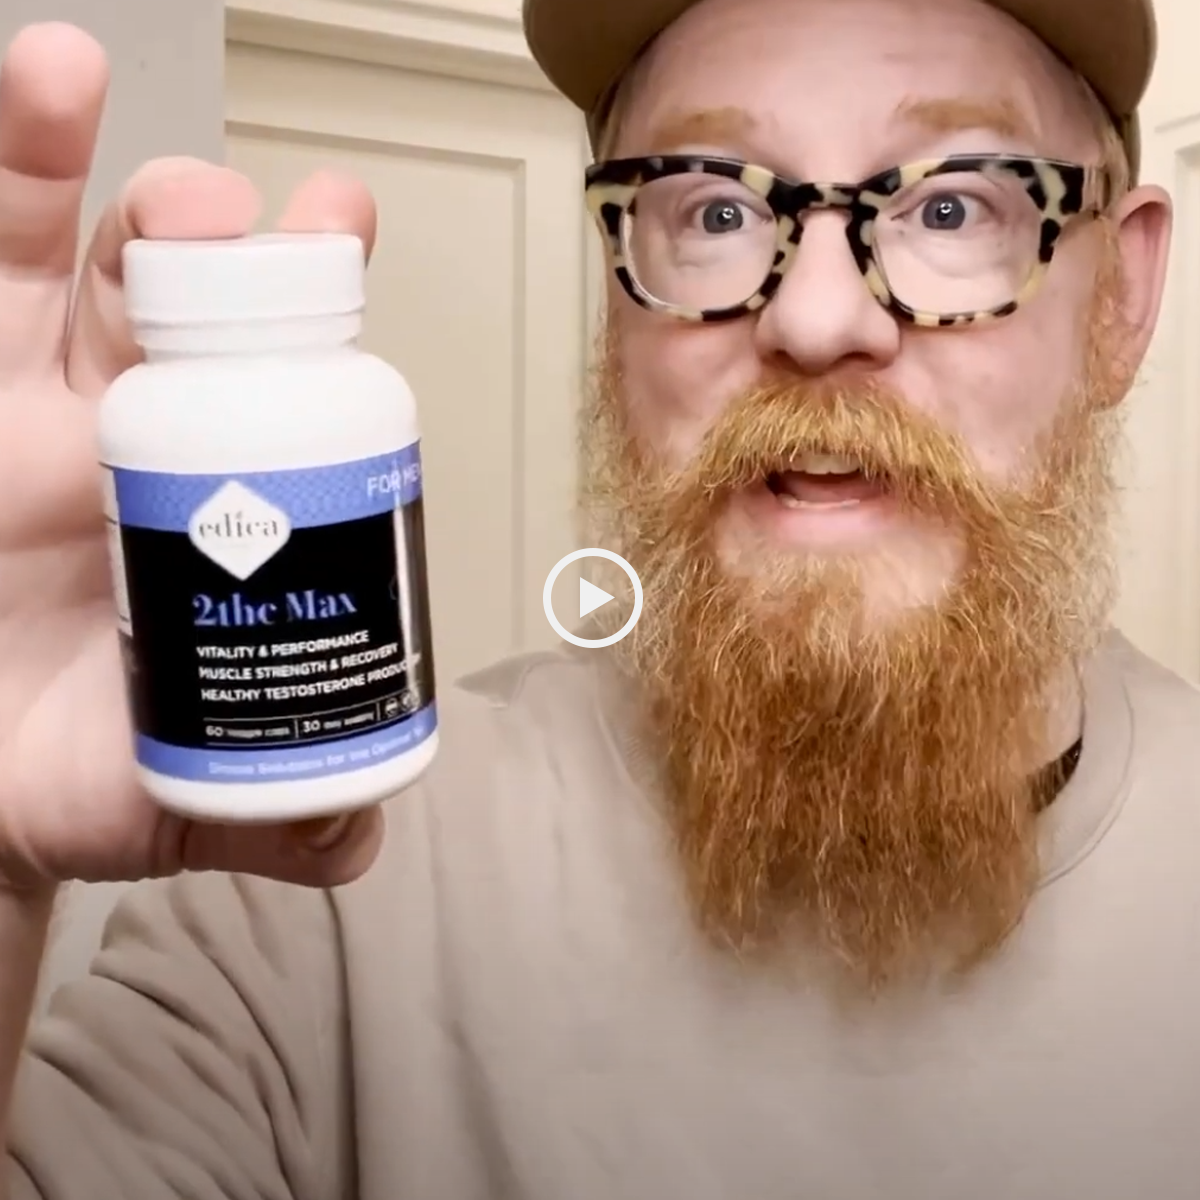 Patricks Experience With Our 2theMax™ Supplement